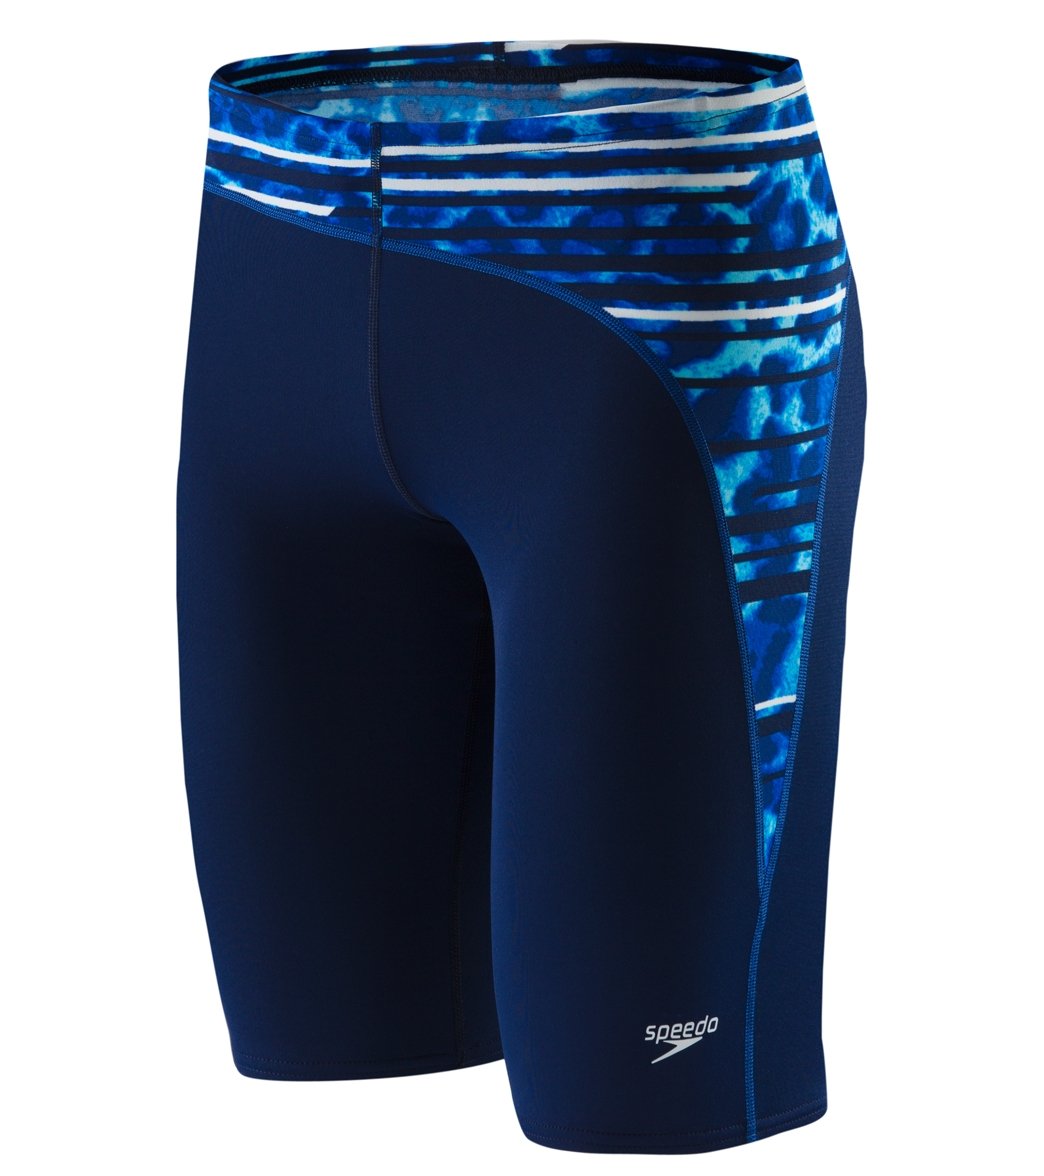 Speedo PowerFLEX Eco Got You Youth Jammer Swimsuit at SwimOutlet.com